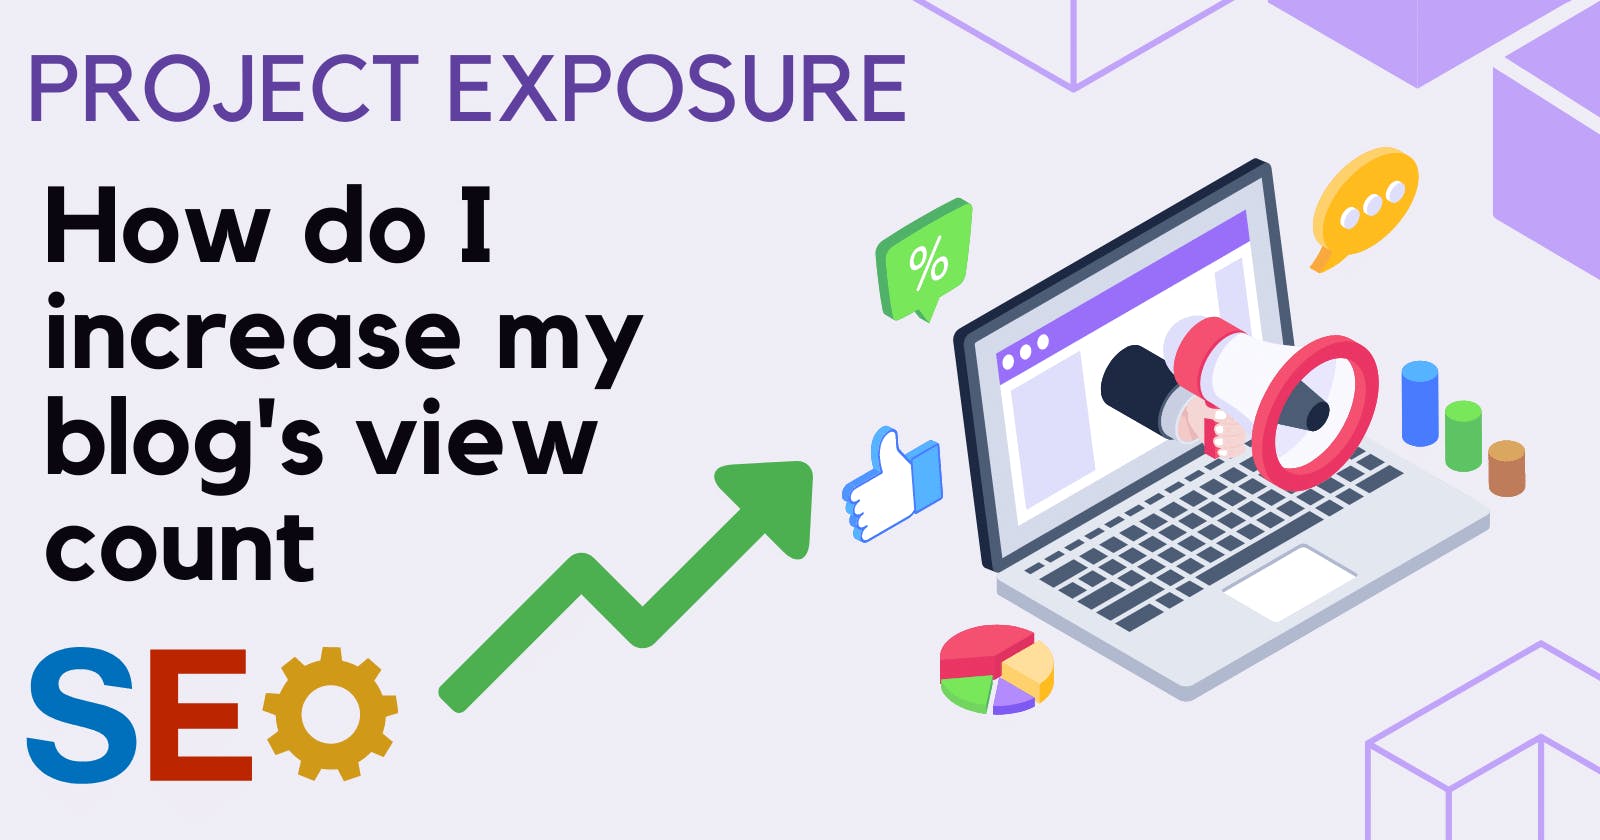 Project Exposure: [0] How do I increase my blog's view count